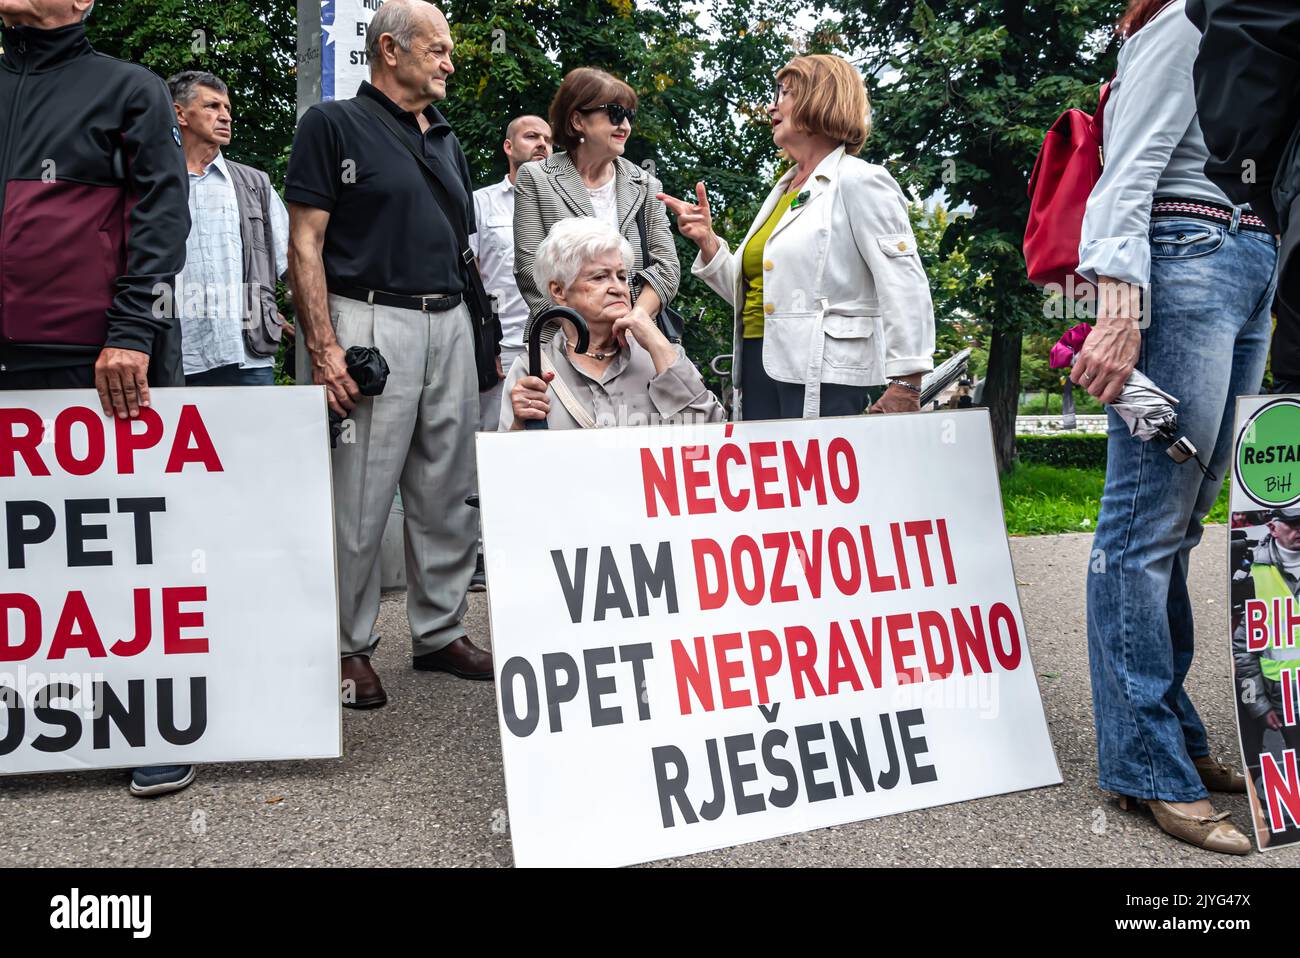 Citizens are protesting in front of the OHR building  against the amendment of the electoral law in Bosnia and Herzegovina Stock Photo